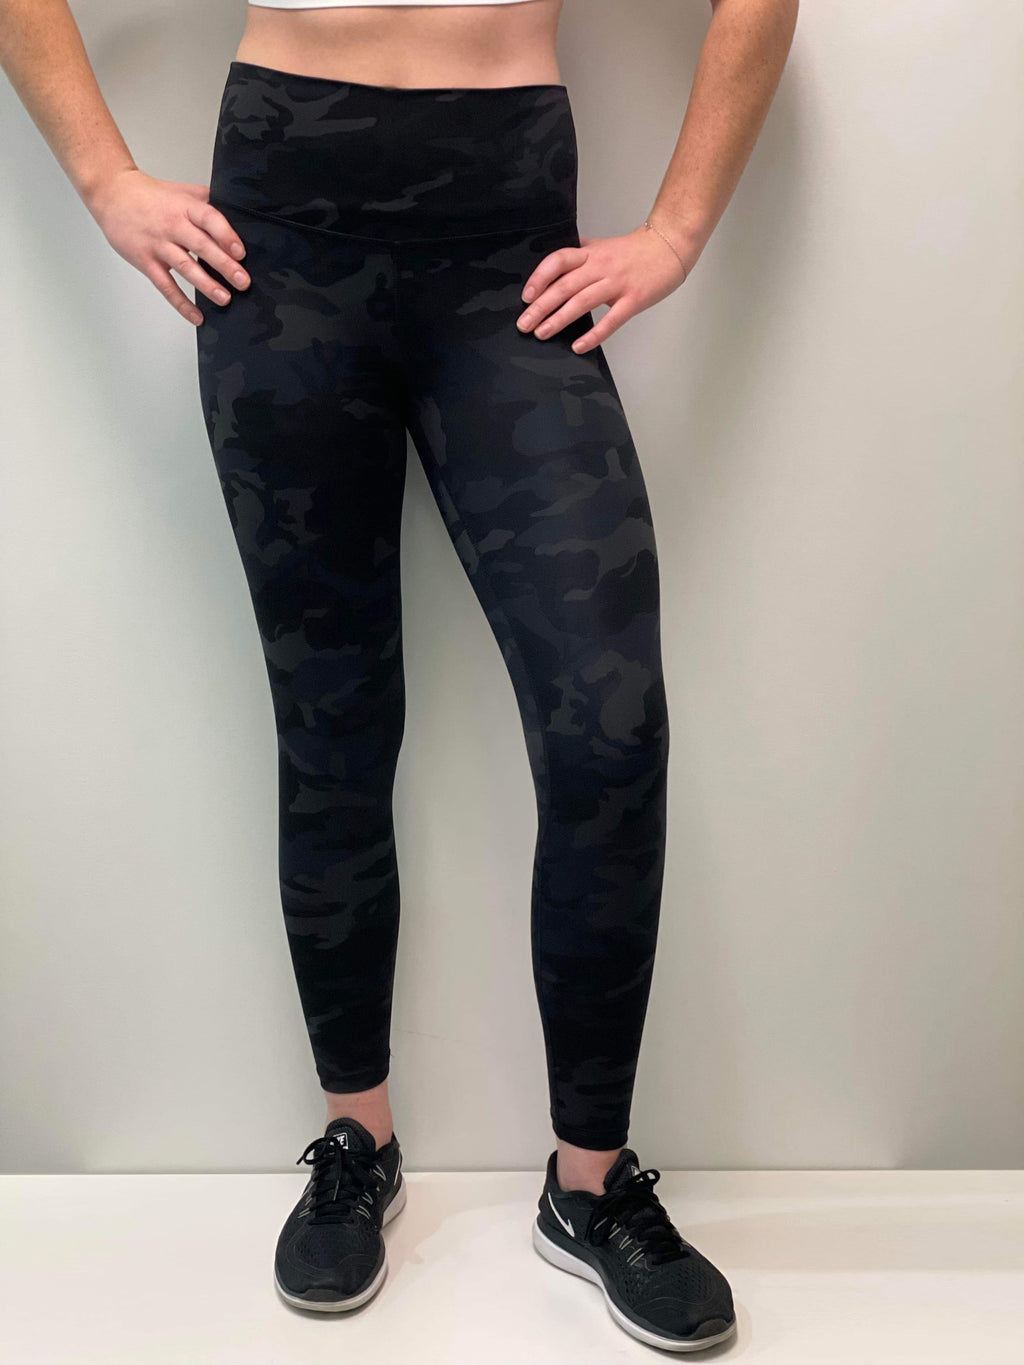 Asquith Move It Leggings Black : Extra Small - PLAISIRS - Wellbeing